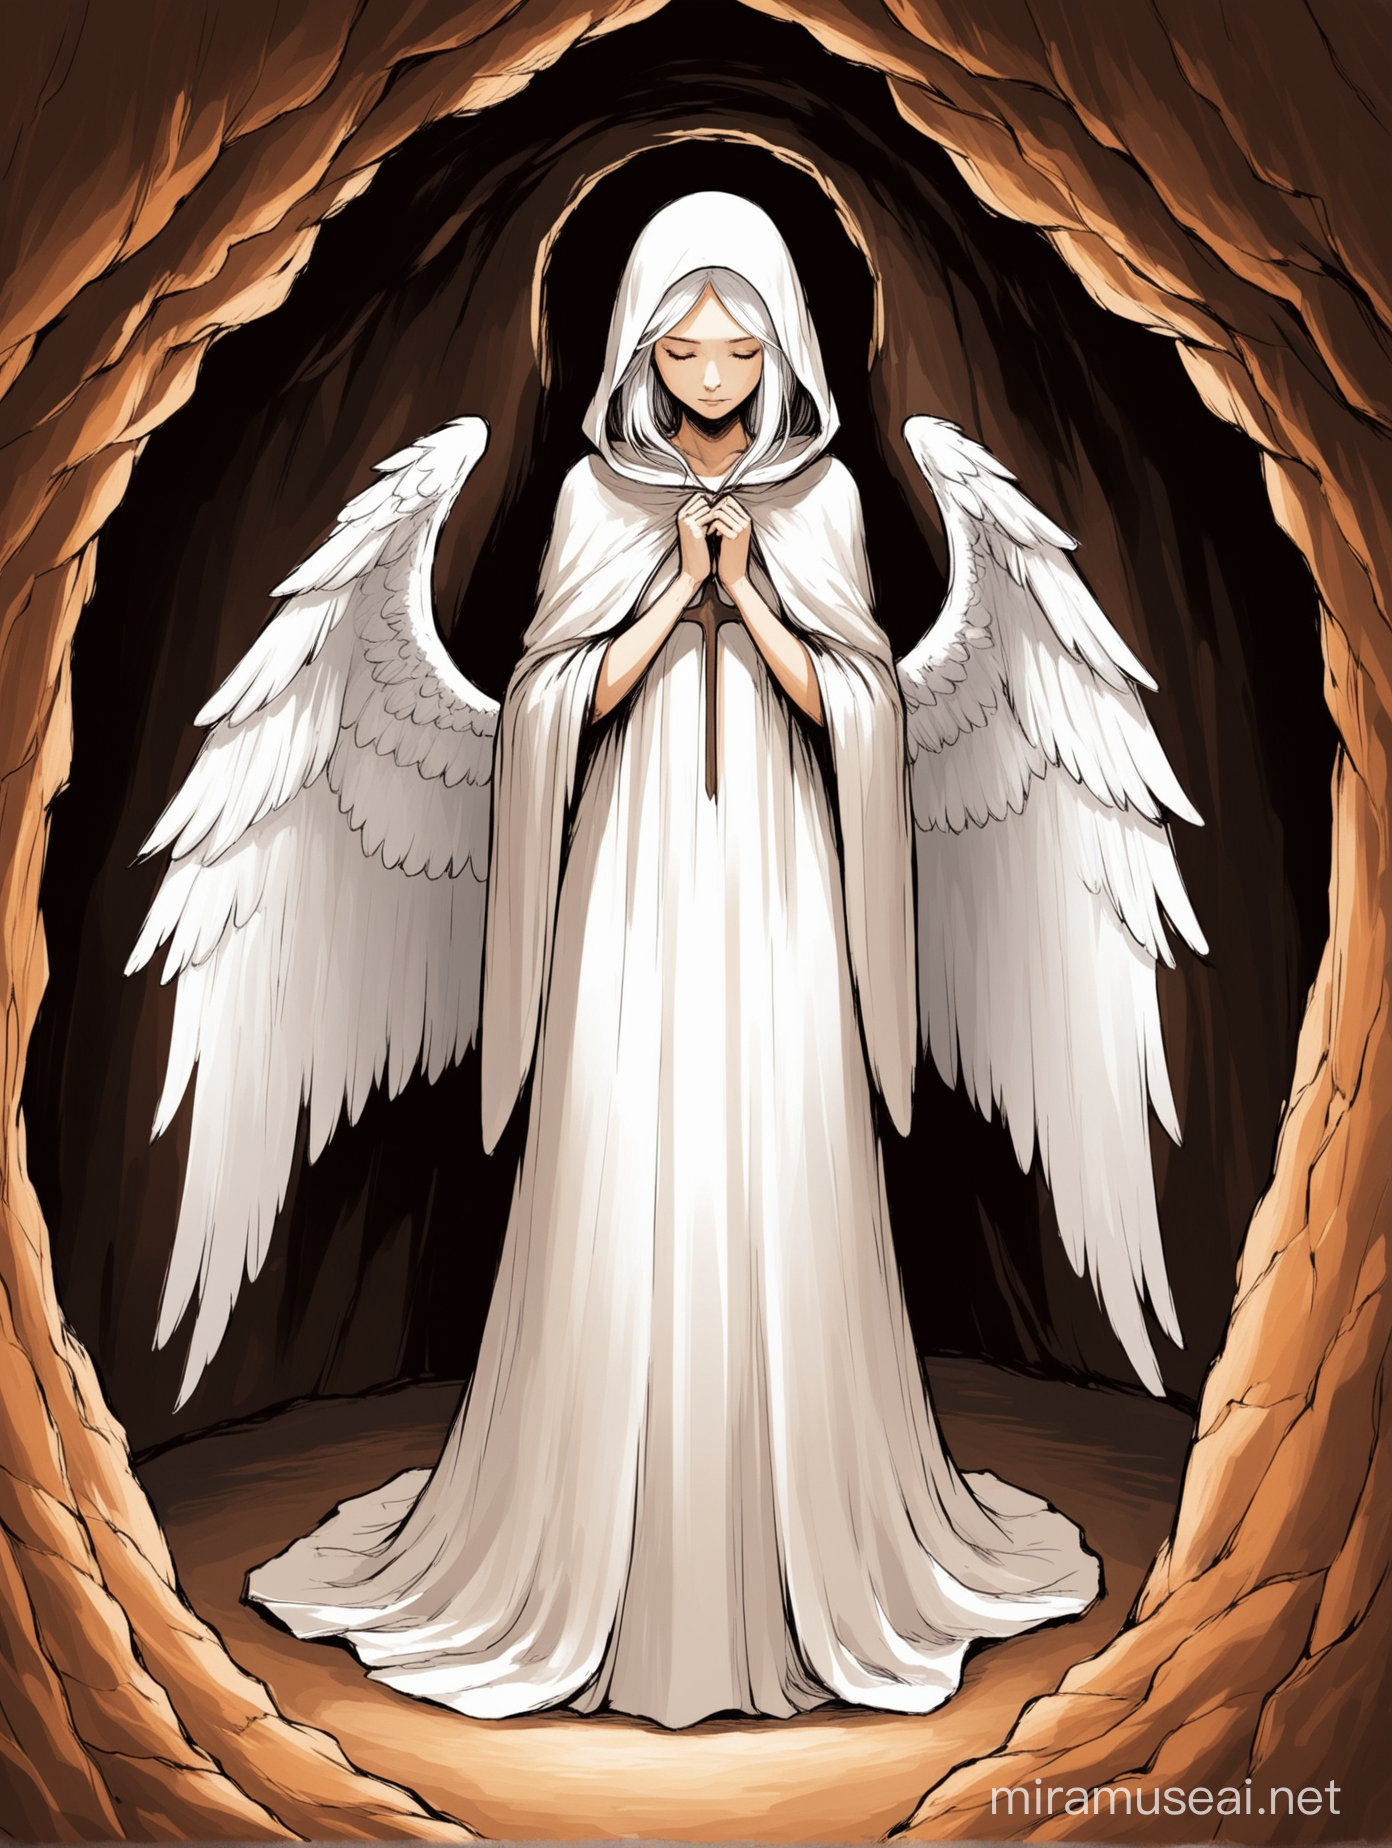 Make a cave drawing of a cloaked woman with white hair looking down peacefully. she has angel wings and is wearing a cloak. 